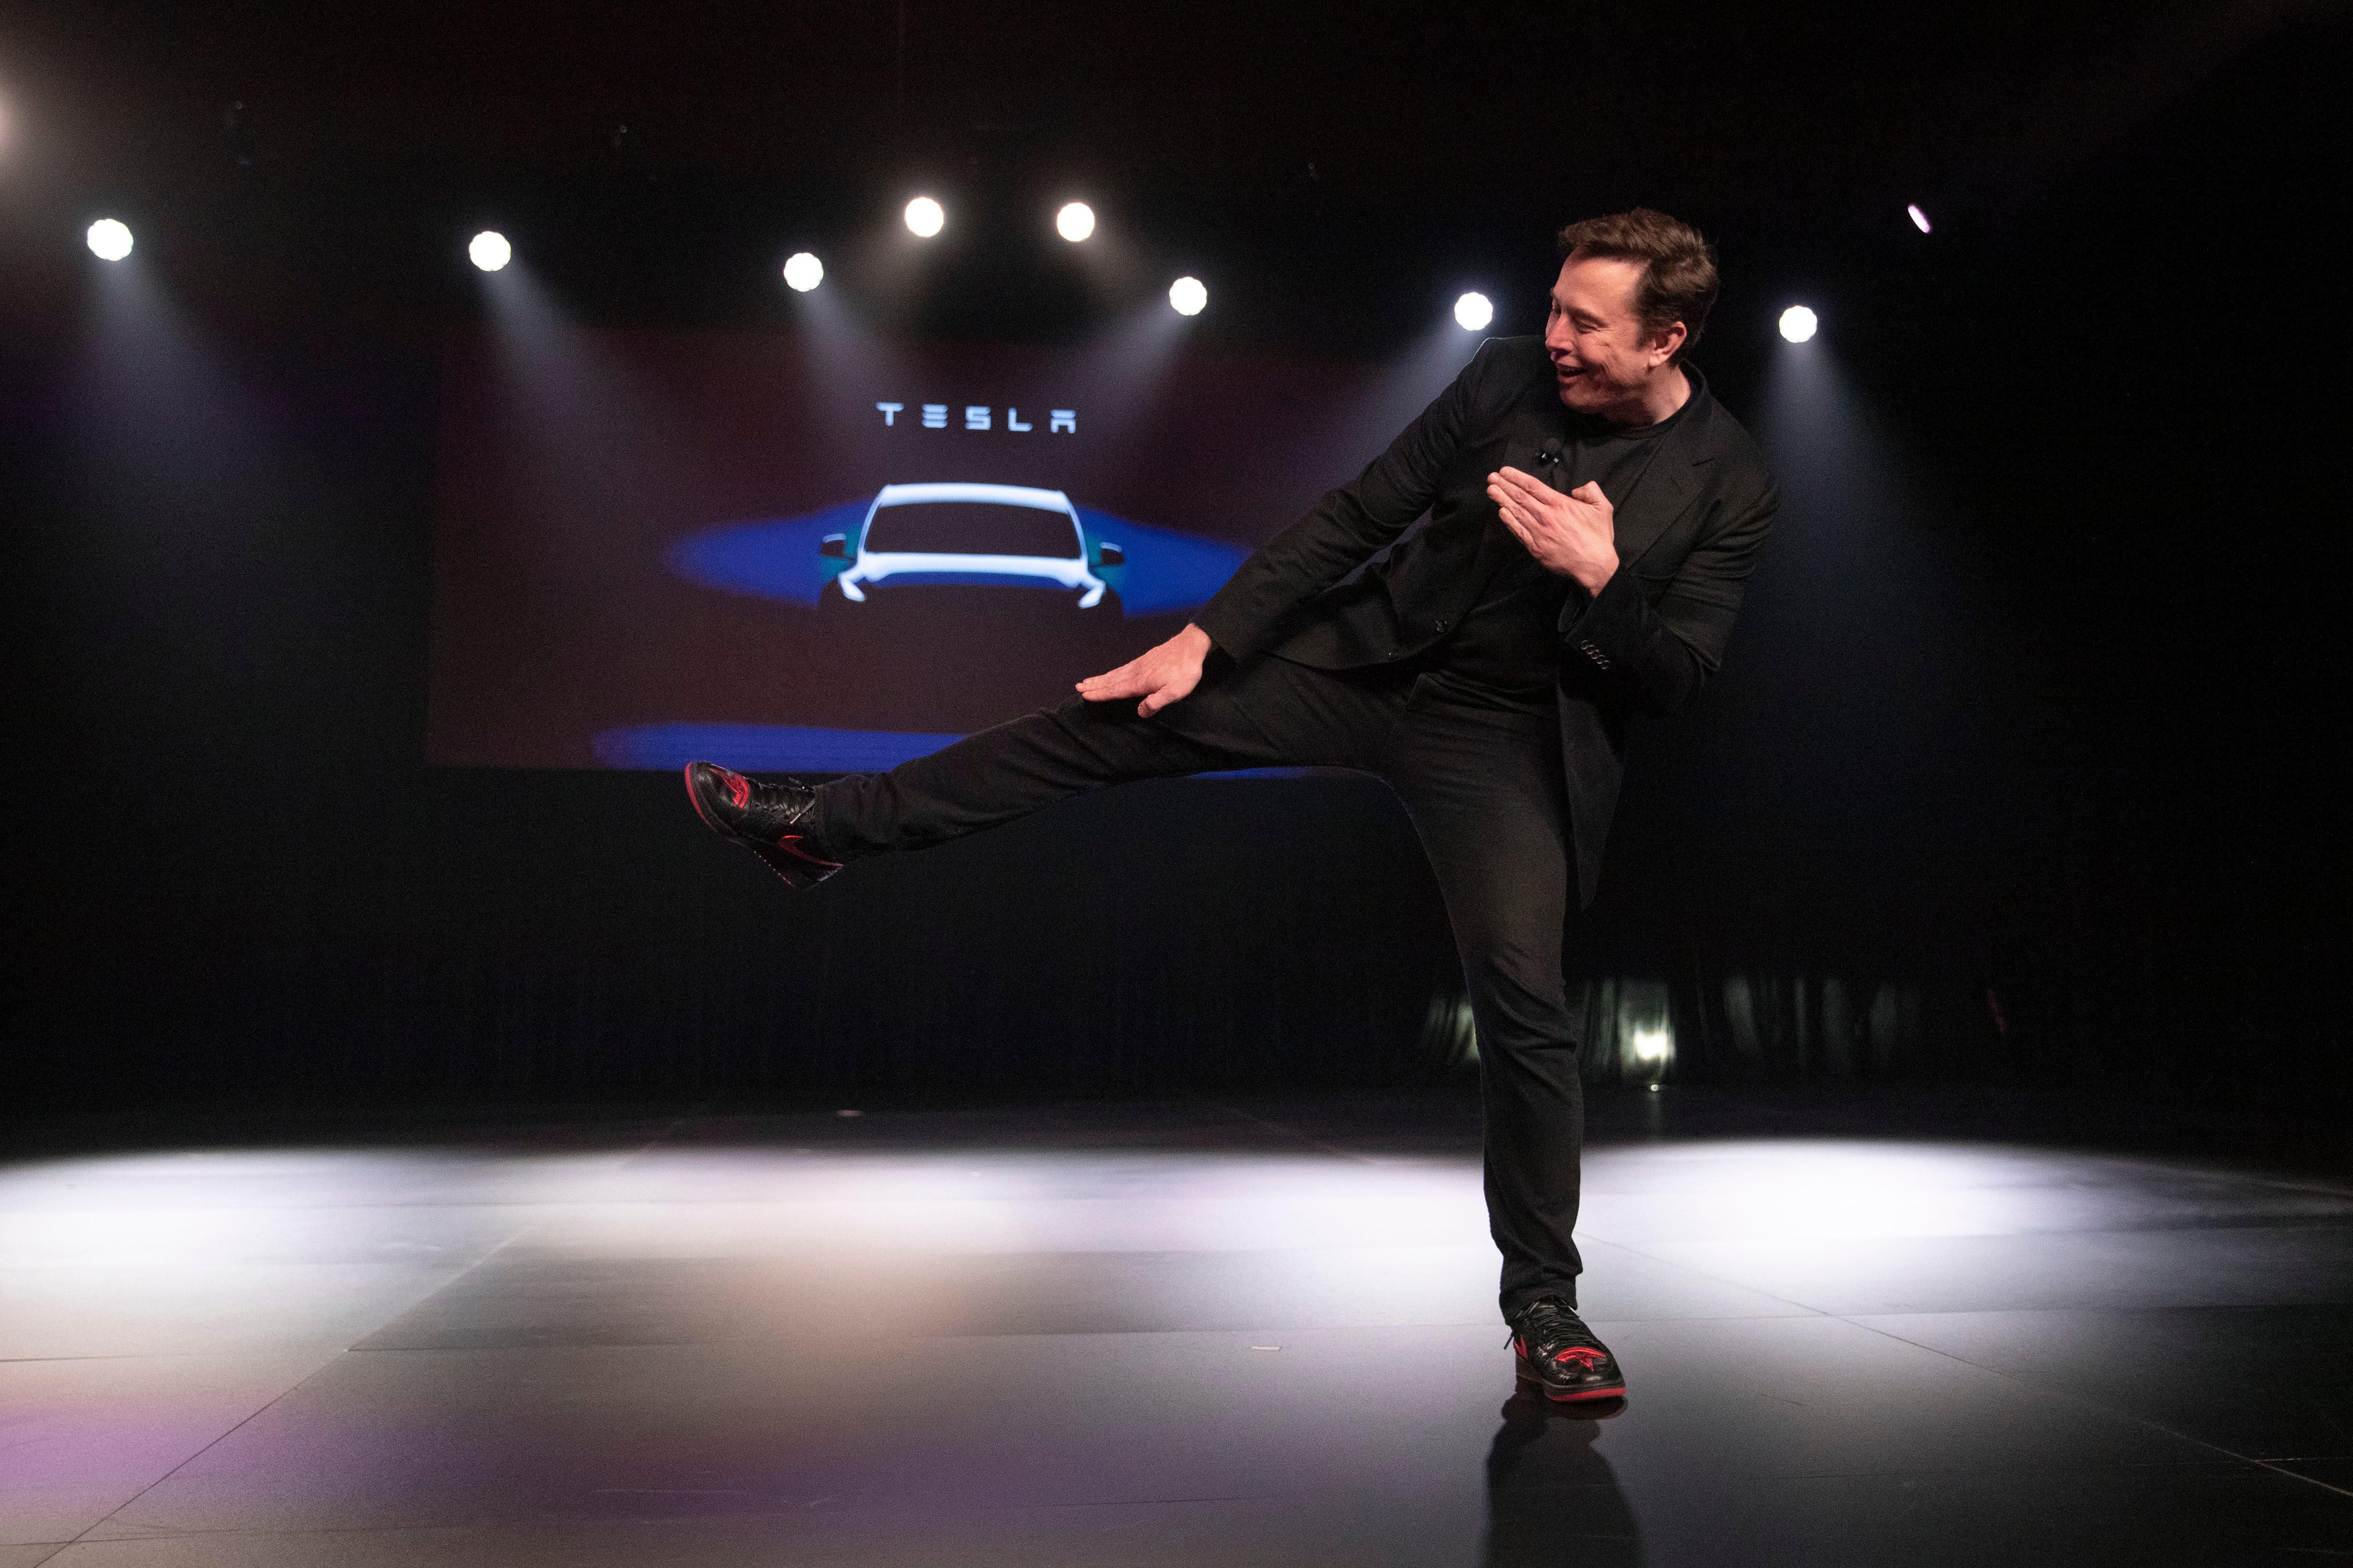 Tesla CEO Elon Musk jokingly kicks before introducing the Model Y at Tesla's design studio Thursday, March 14, 2019, in Hawthorne, Calif. The Model Y may be Tesla's most important product yet as it attempts to expand into the mainstream and generate enough cash to repay massive debts that threaten to topple the Palo Alto, Calif., company.